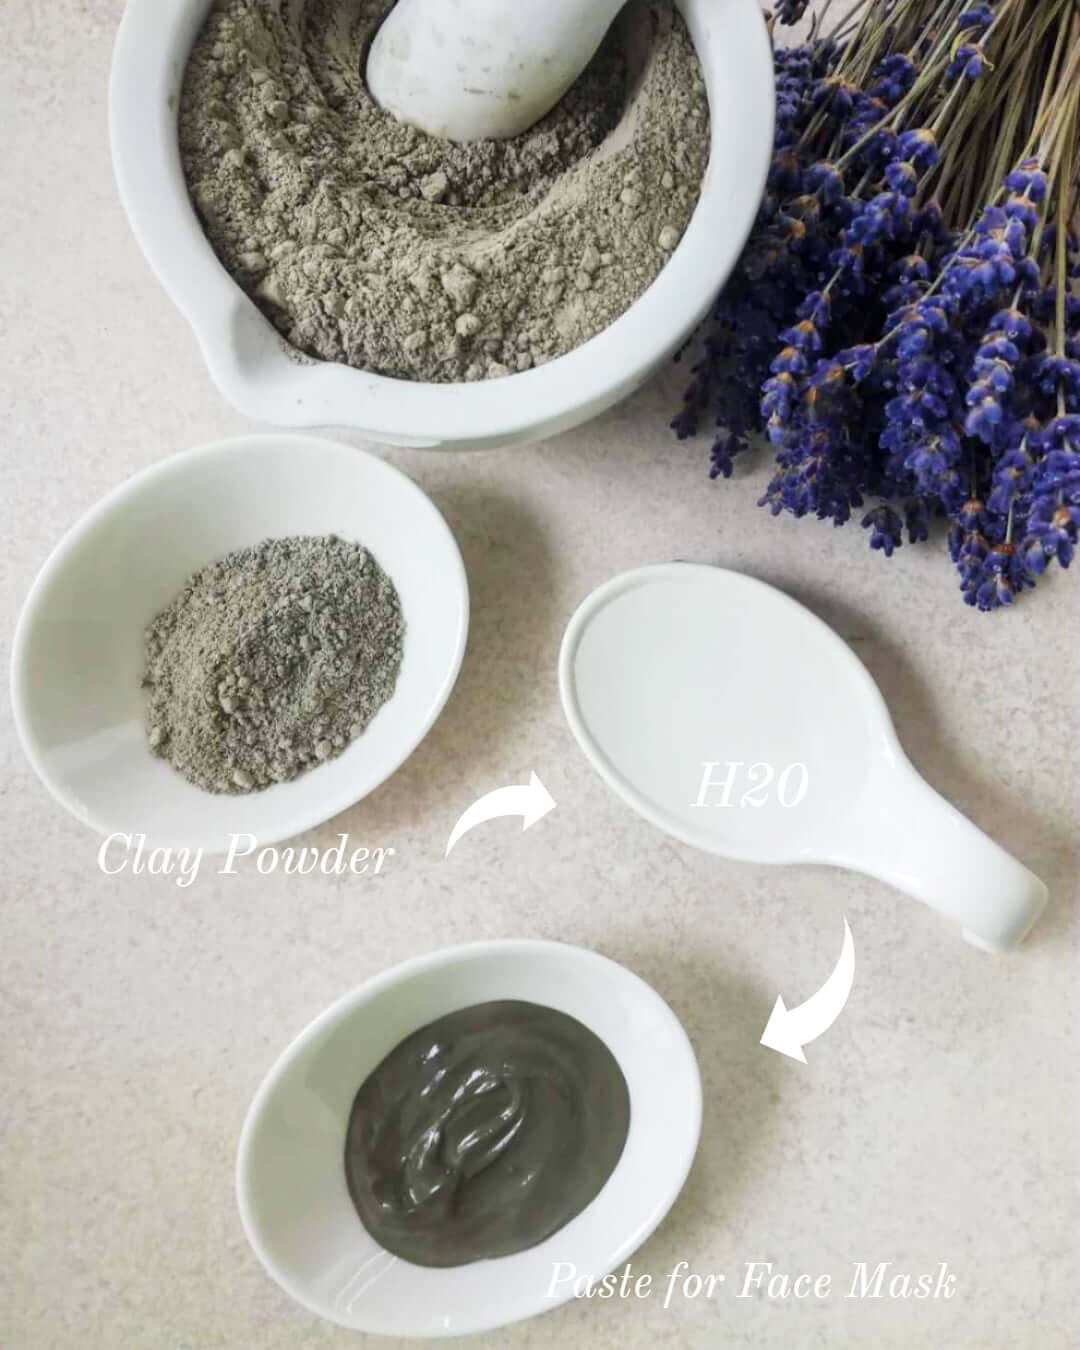 Blue clay powder and water combination, paste for face